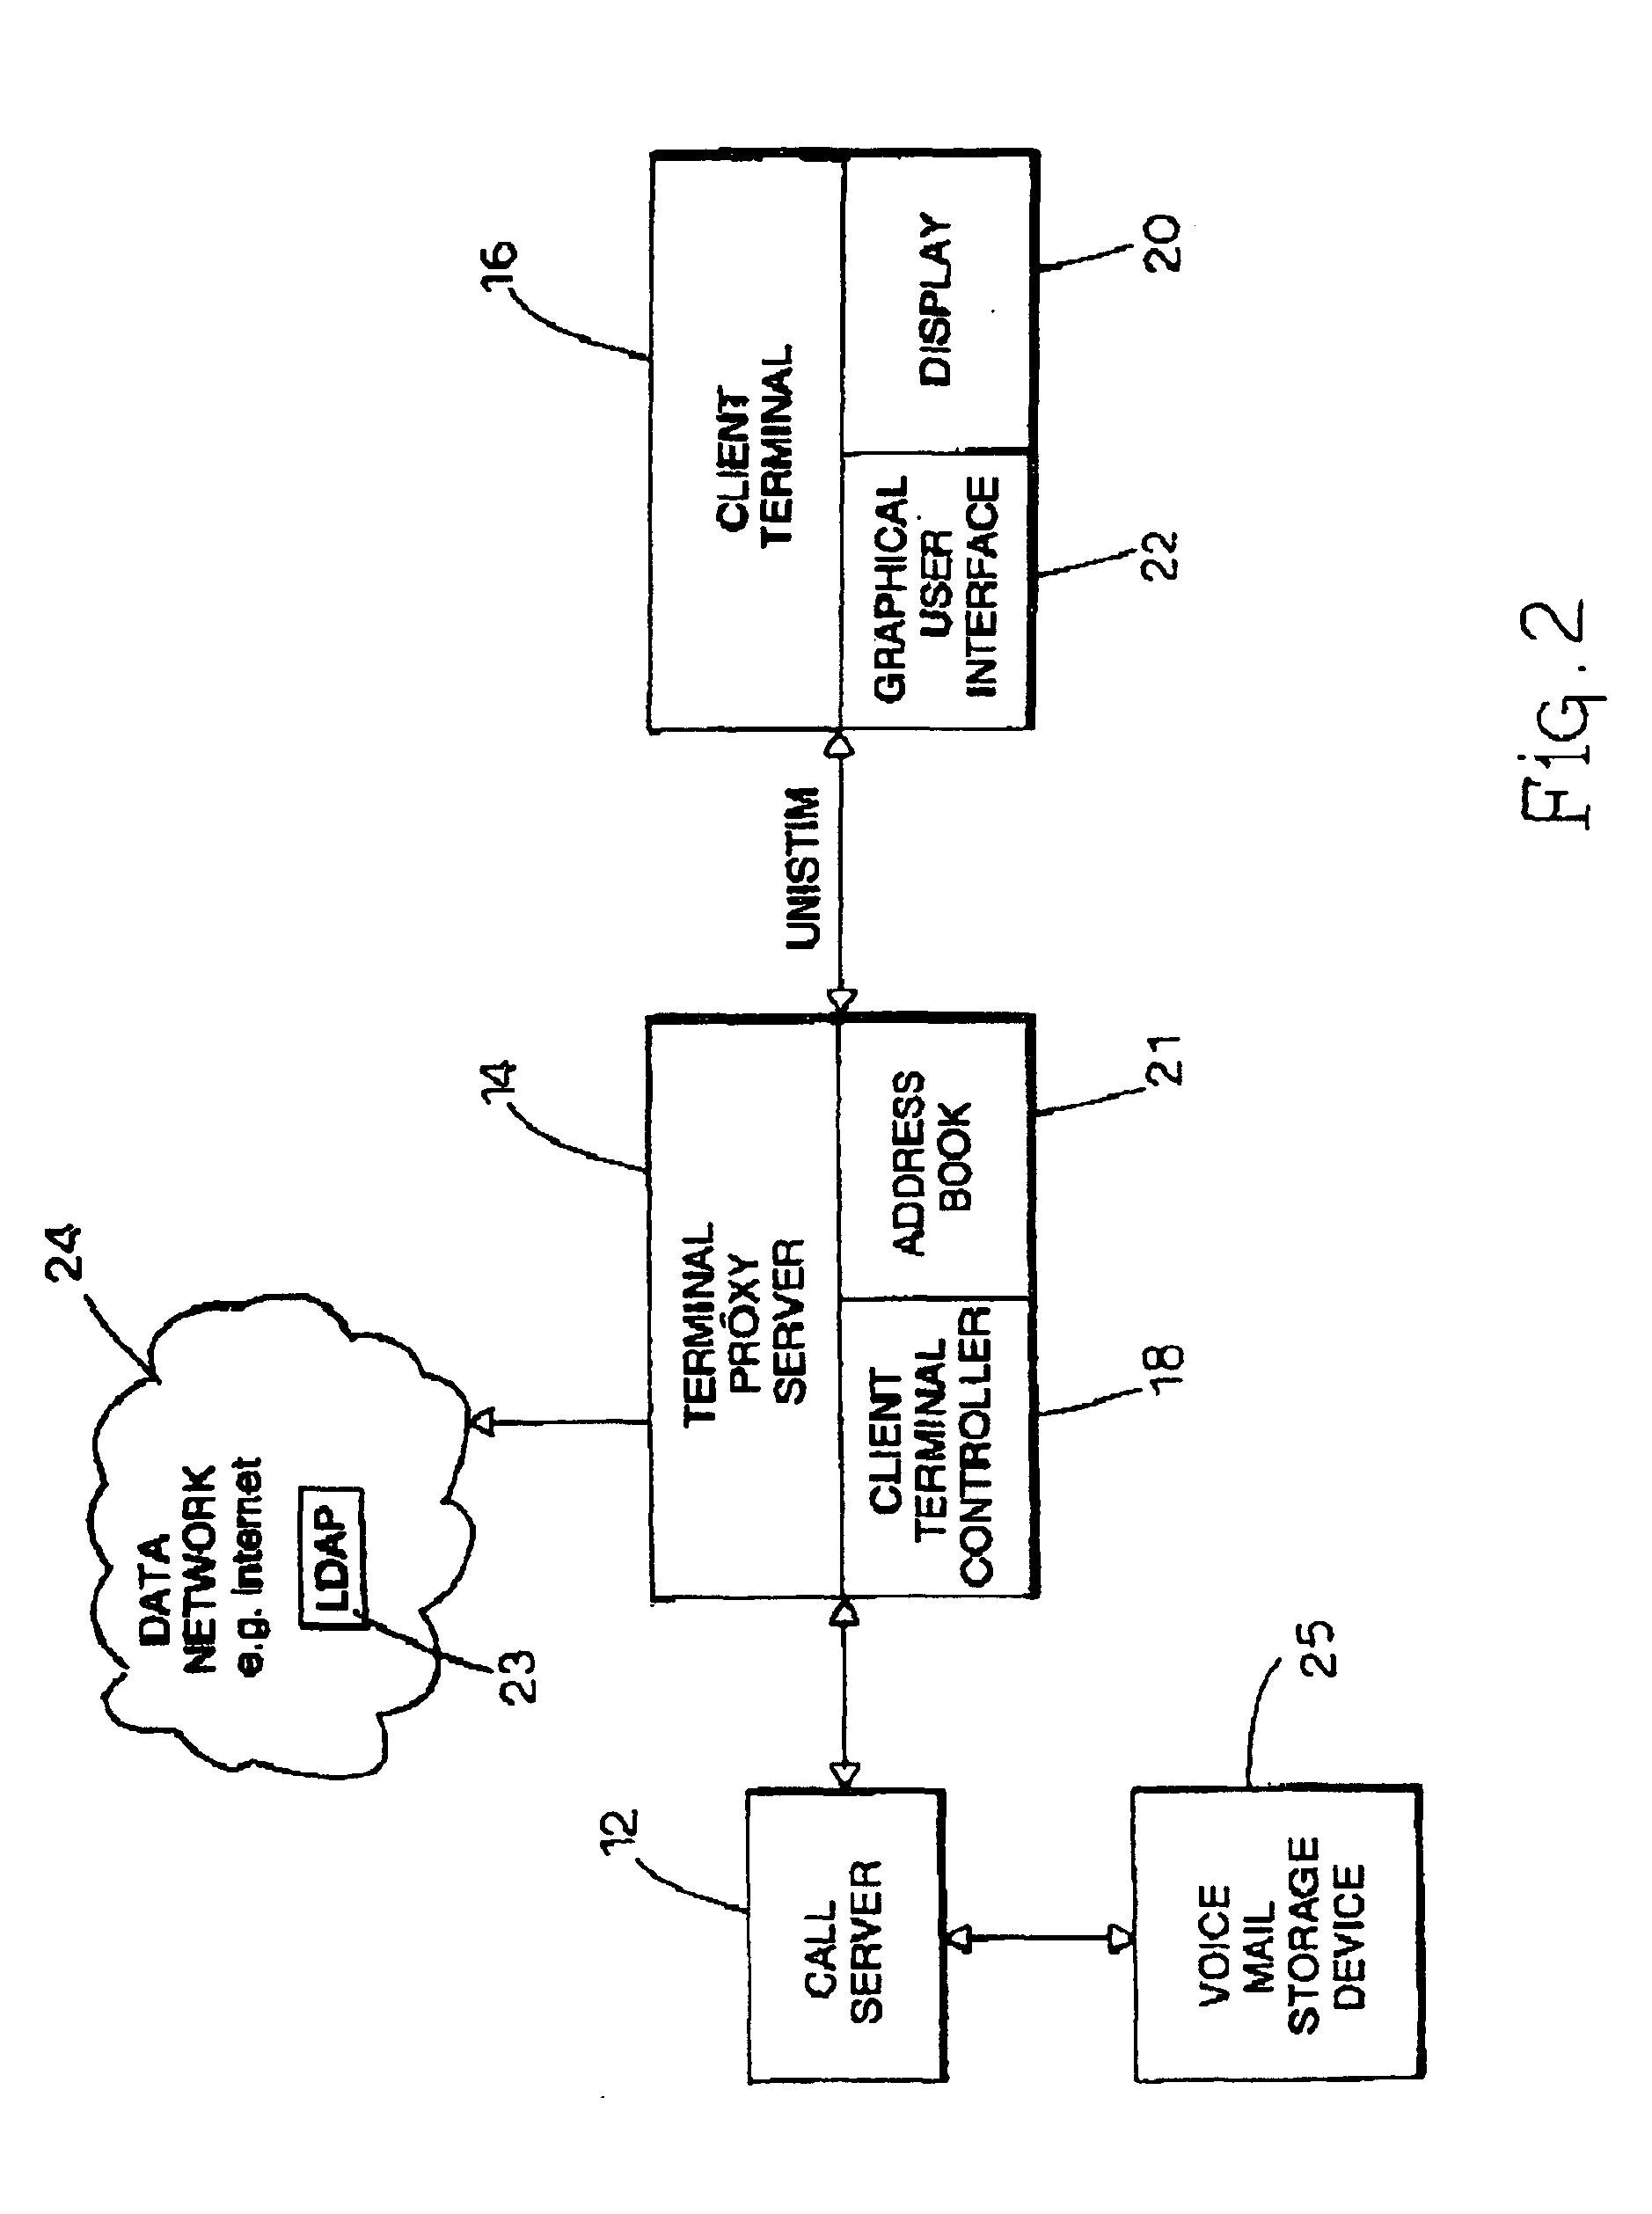 Client-server network for managing internet protocol voice packets